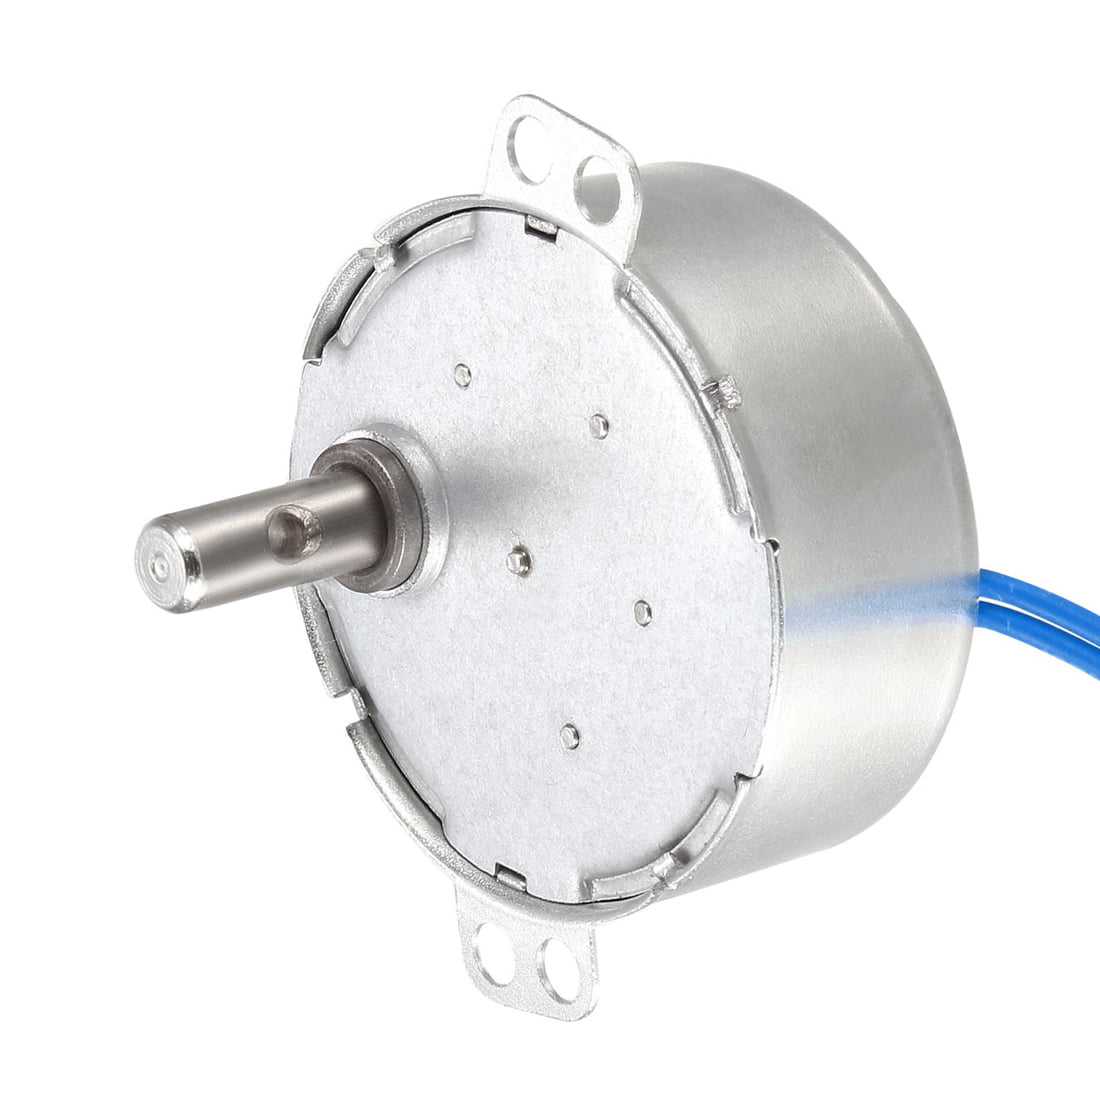 Details about   Synchron Motor Turntable Synchronous Motor 100-127 VAC 10-12RPM 50-60 Hz 4W CCW 